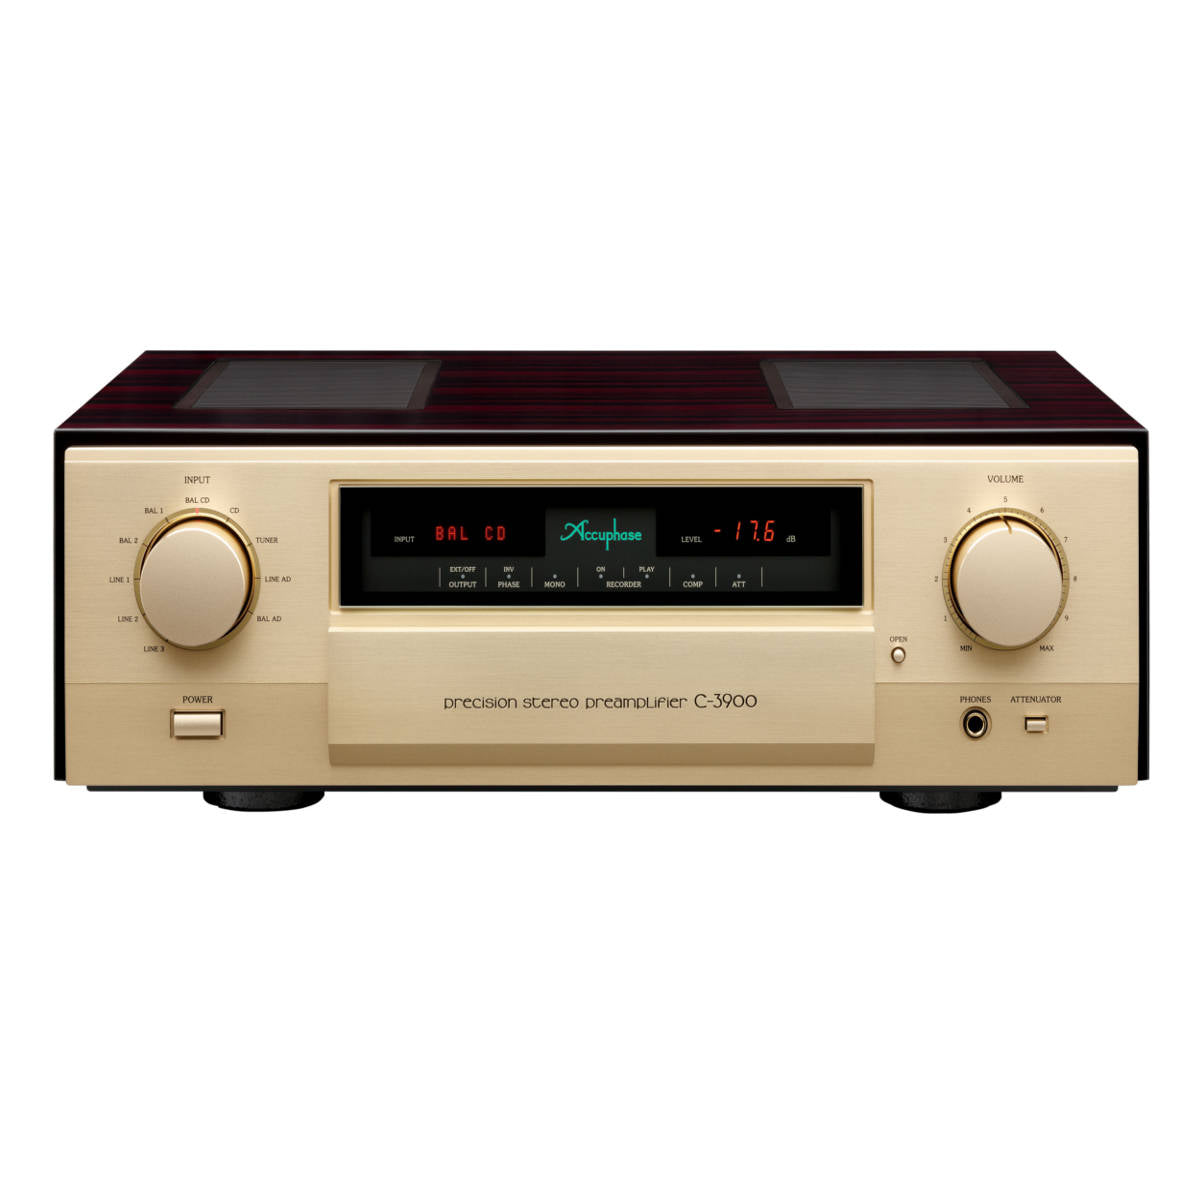 Accuphase C-3900 Precision Stereo Preamplifier - Ooberpad India